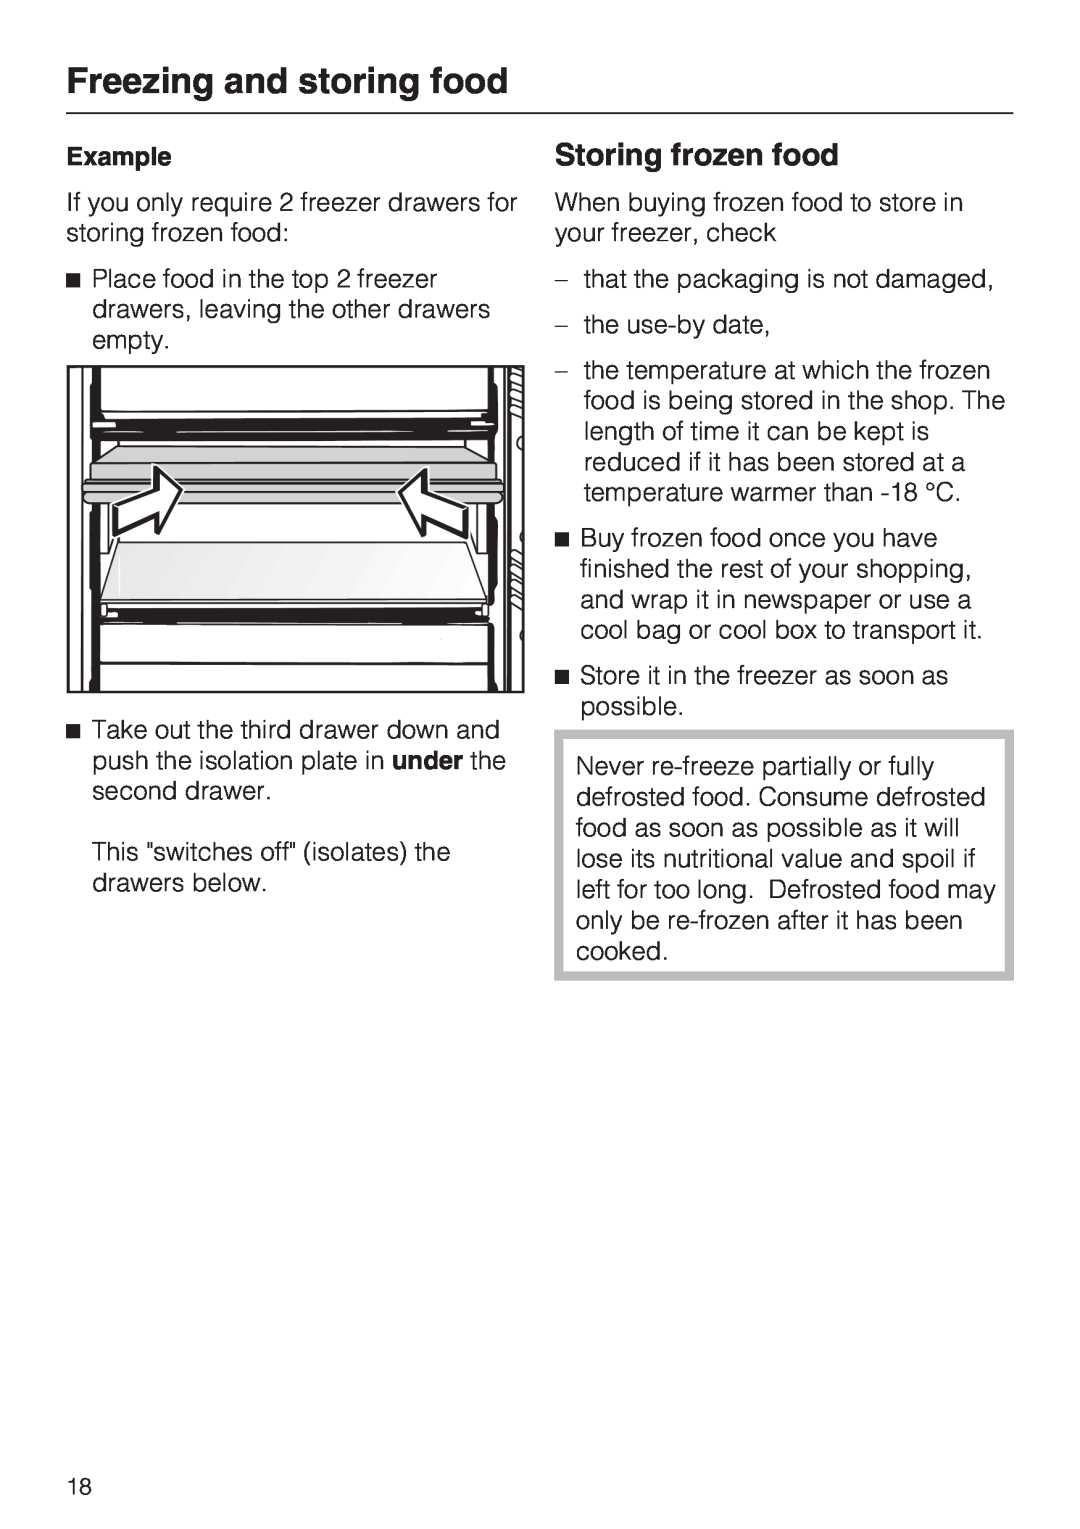 Miele FN 12420 S, FN 12620 S, FN 12220 S installation instructions Storing frozen food, Example, Freezing and storing food 